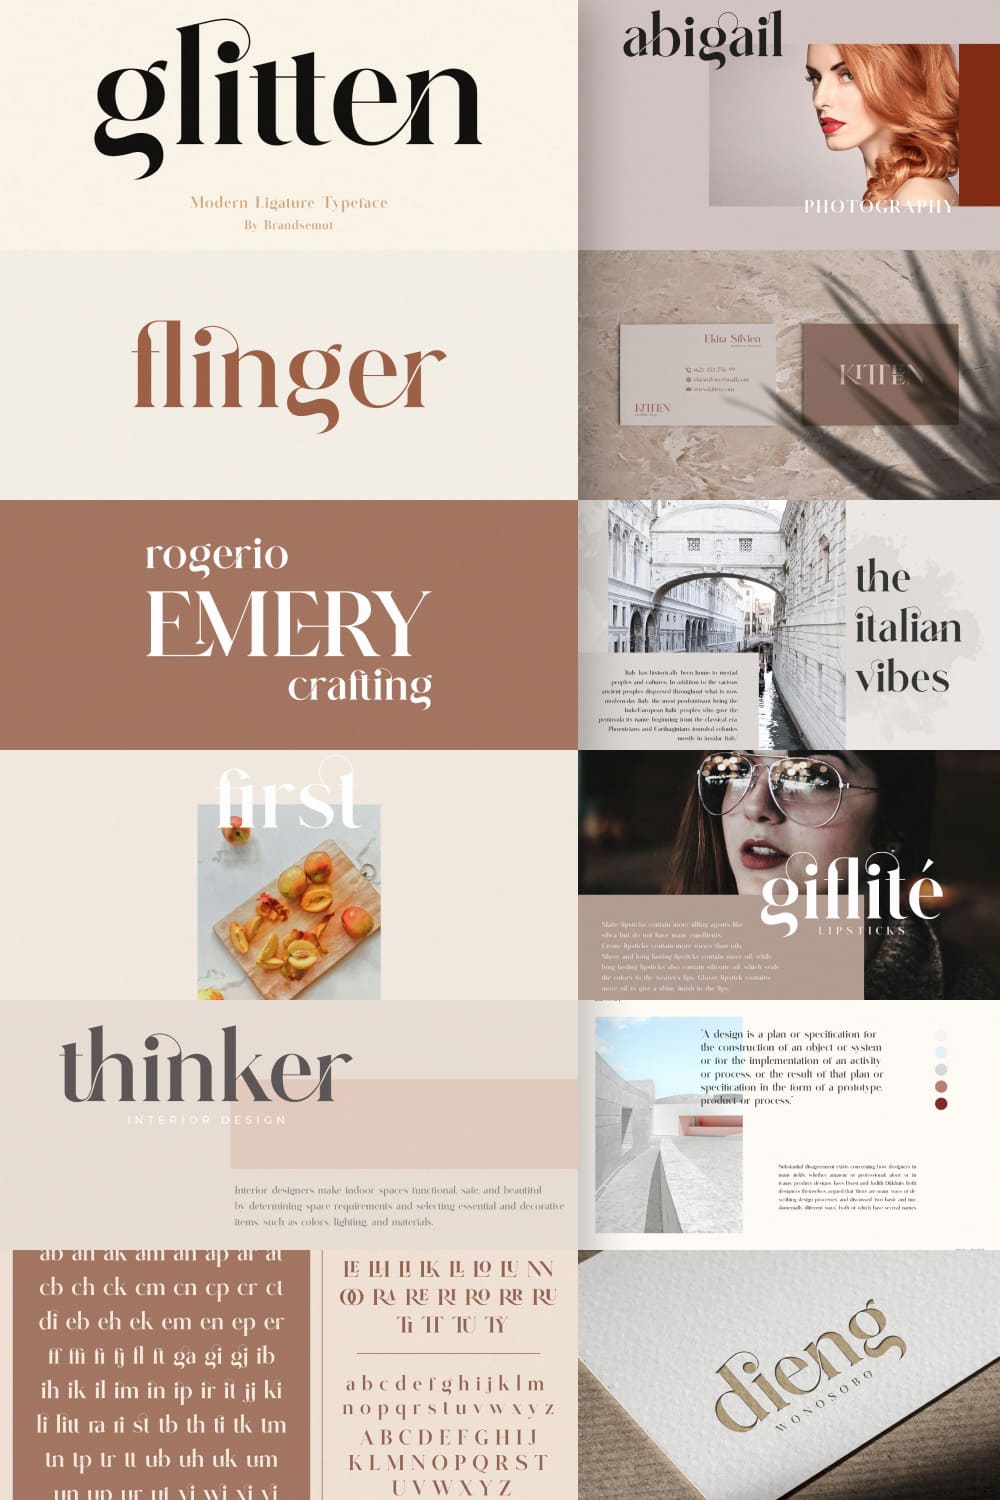 This is a elegant and classy serif typeface – This font is both modern and nostalgic and works great for logos, magazine, social media.